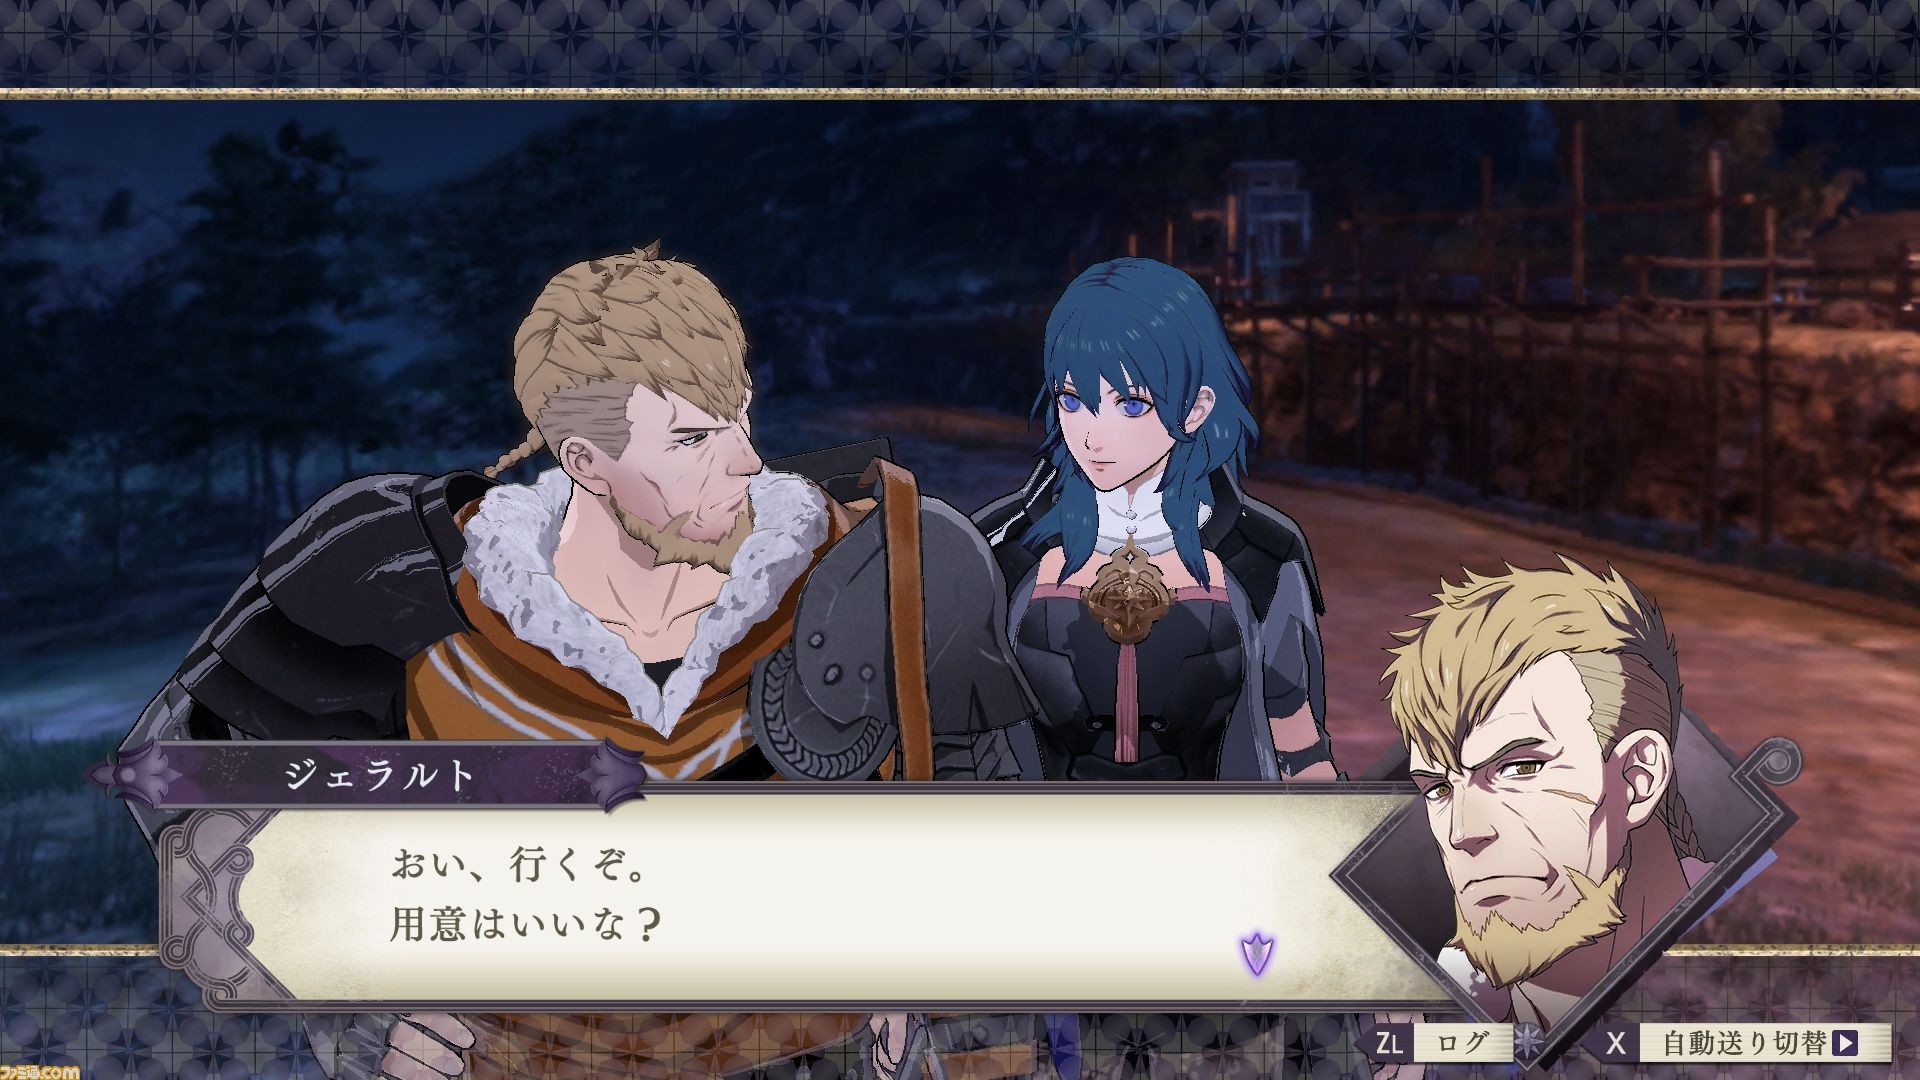 https://www.perfectly-nintendo.com/wp-content/uploads/sites/1/nggallery/fire-emblem-three-houses-25-04-2019-1/10.jpg